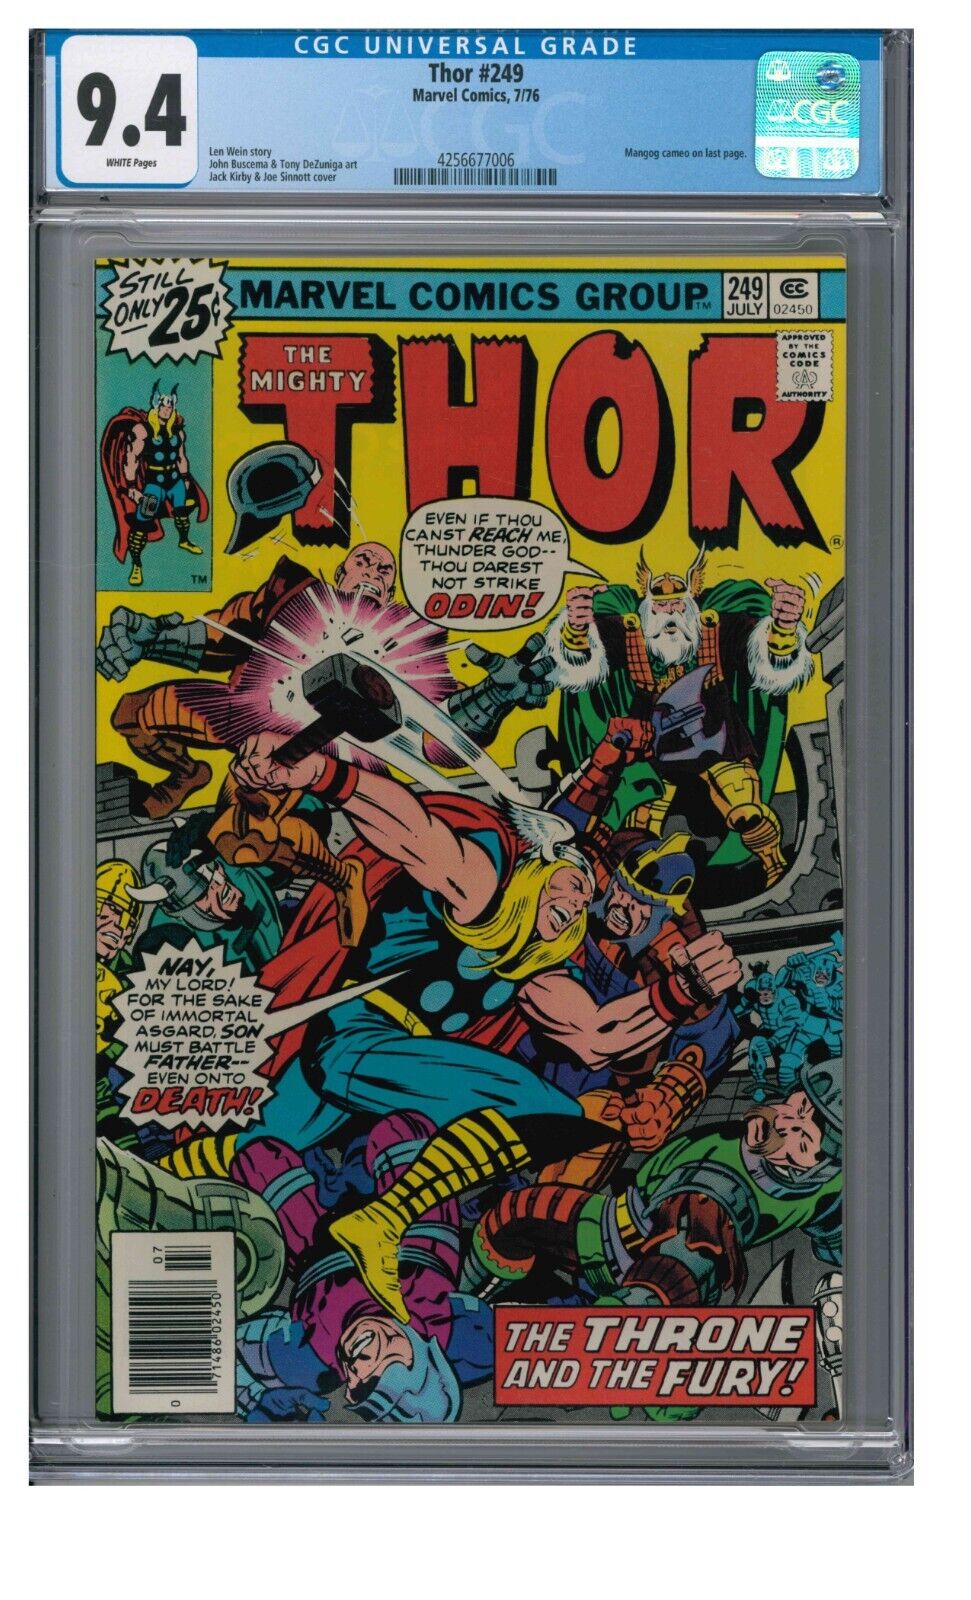 Thor #249 (1976) Bronze Age Jack Kirby Cover CGC 9.4 White Pages ED842